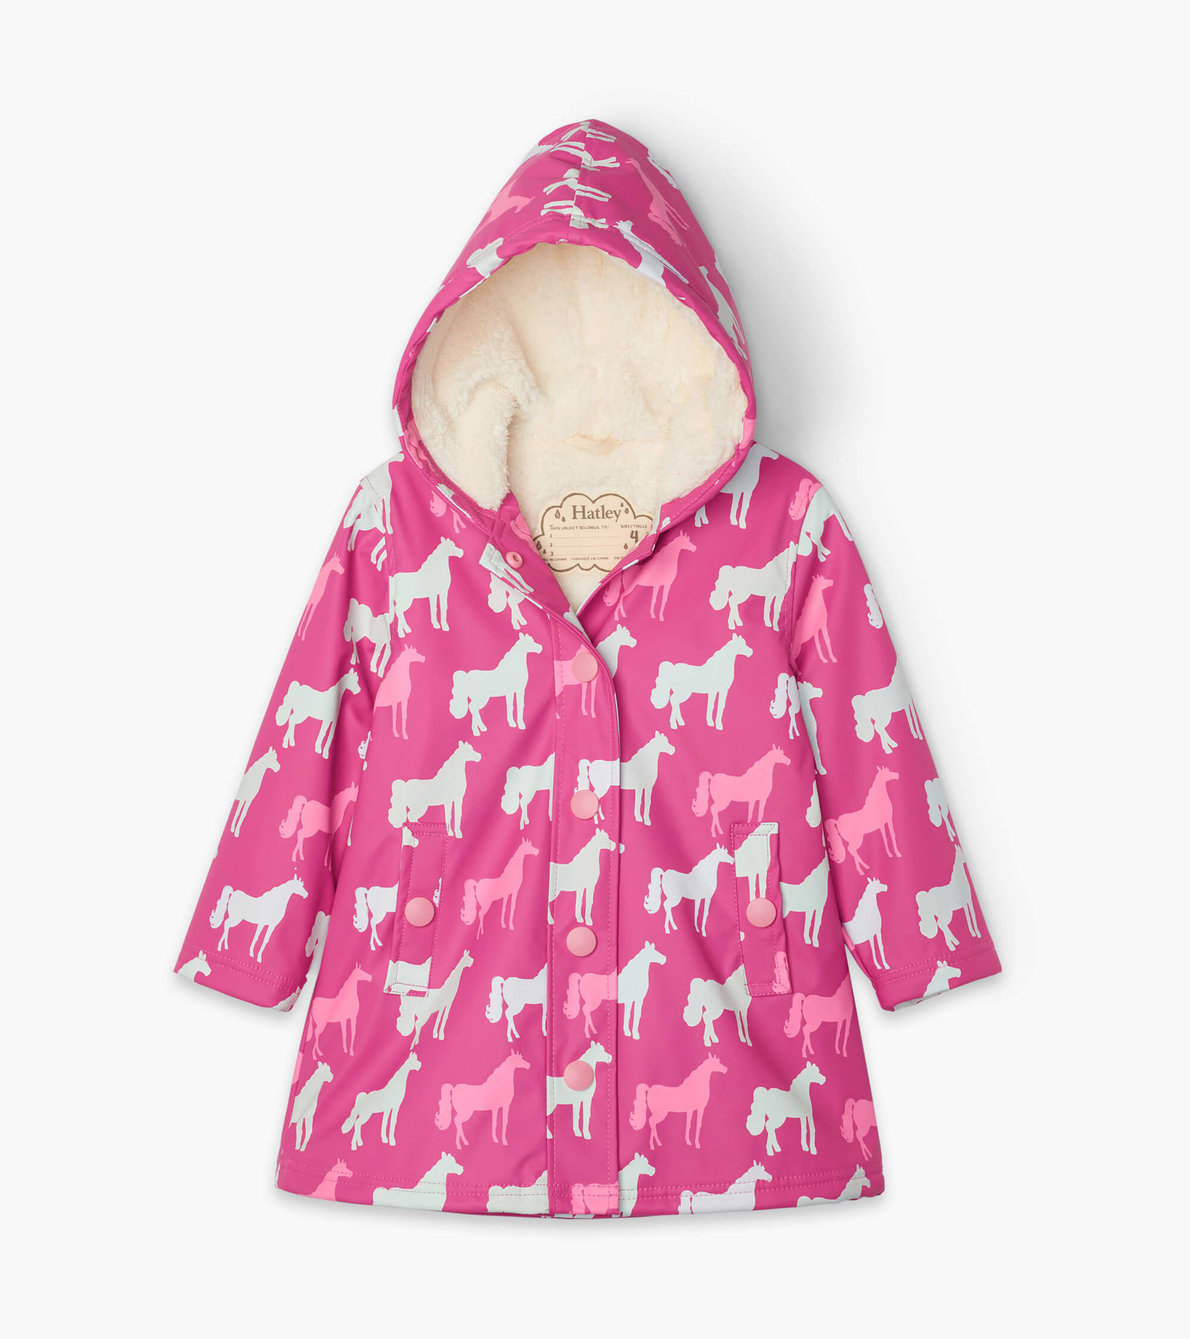 View larger image of Horse Silhouettes Sherpa Lined Colour Changing Splash Jacket